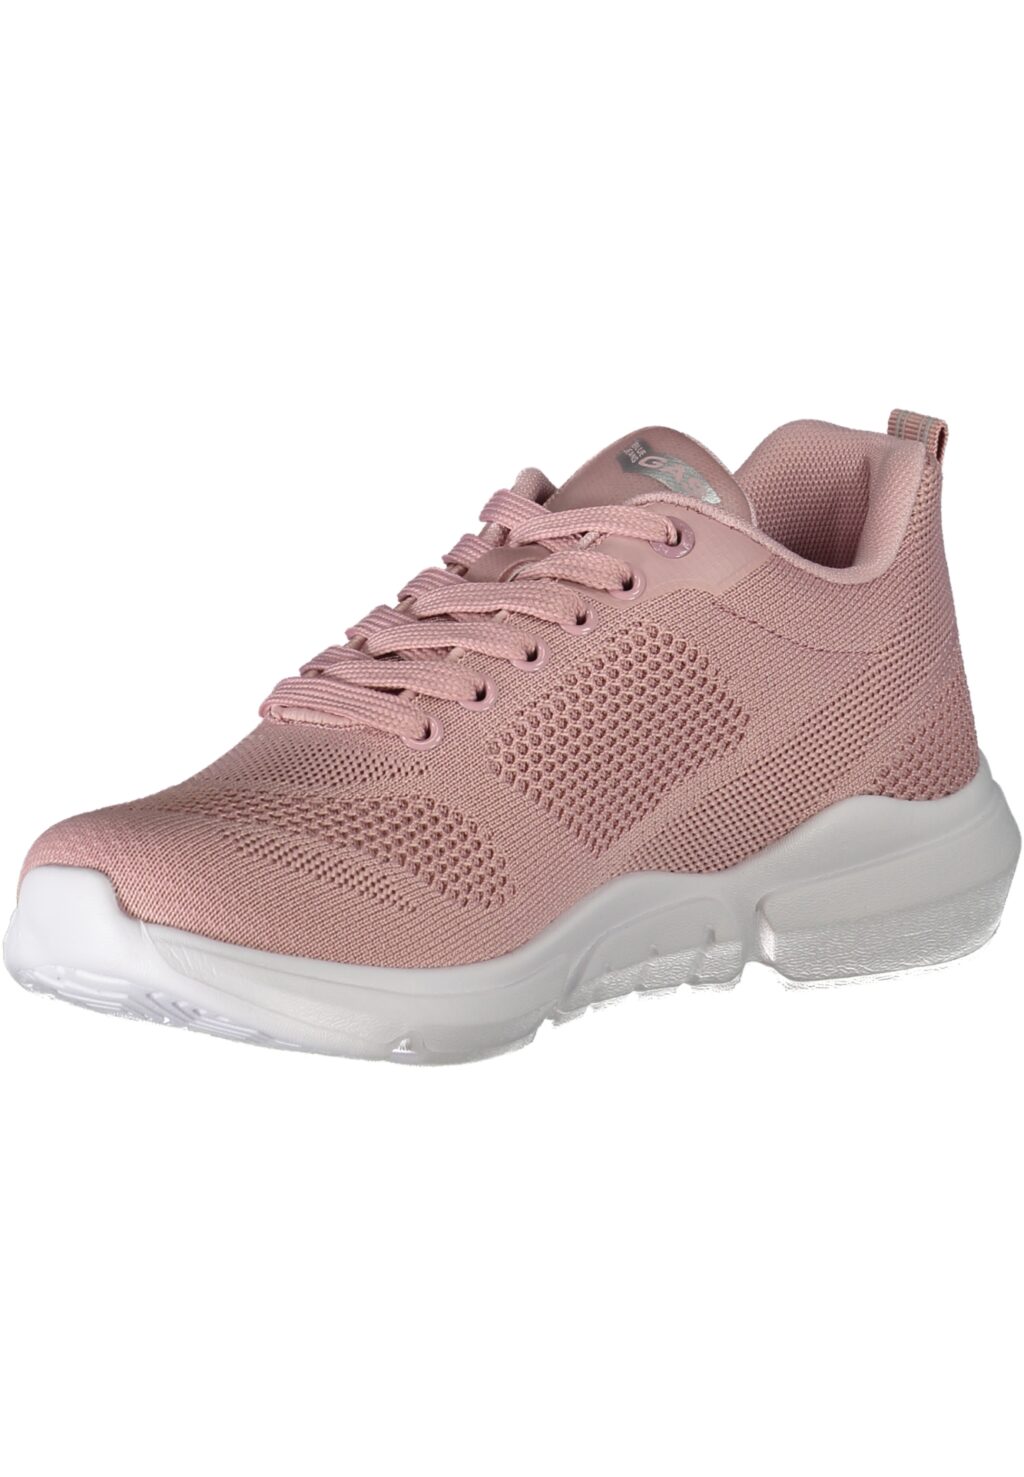 GAS PINK WOMEN'S SPORTS SHOES GAW417500_RS0044